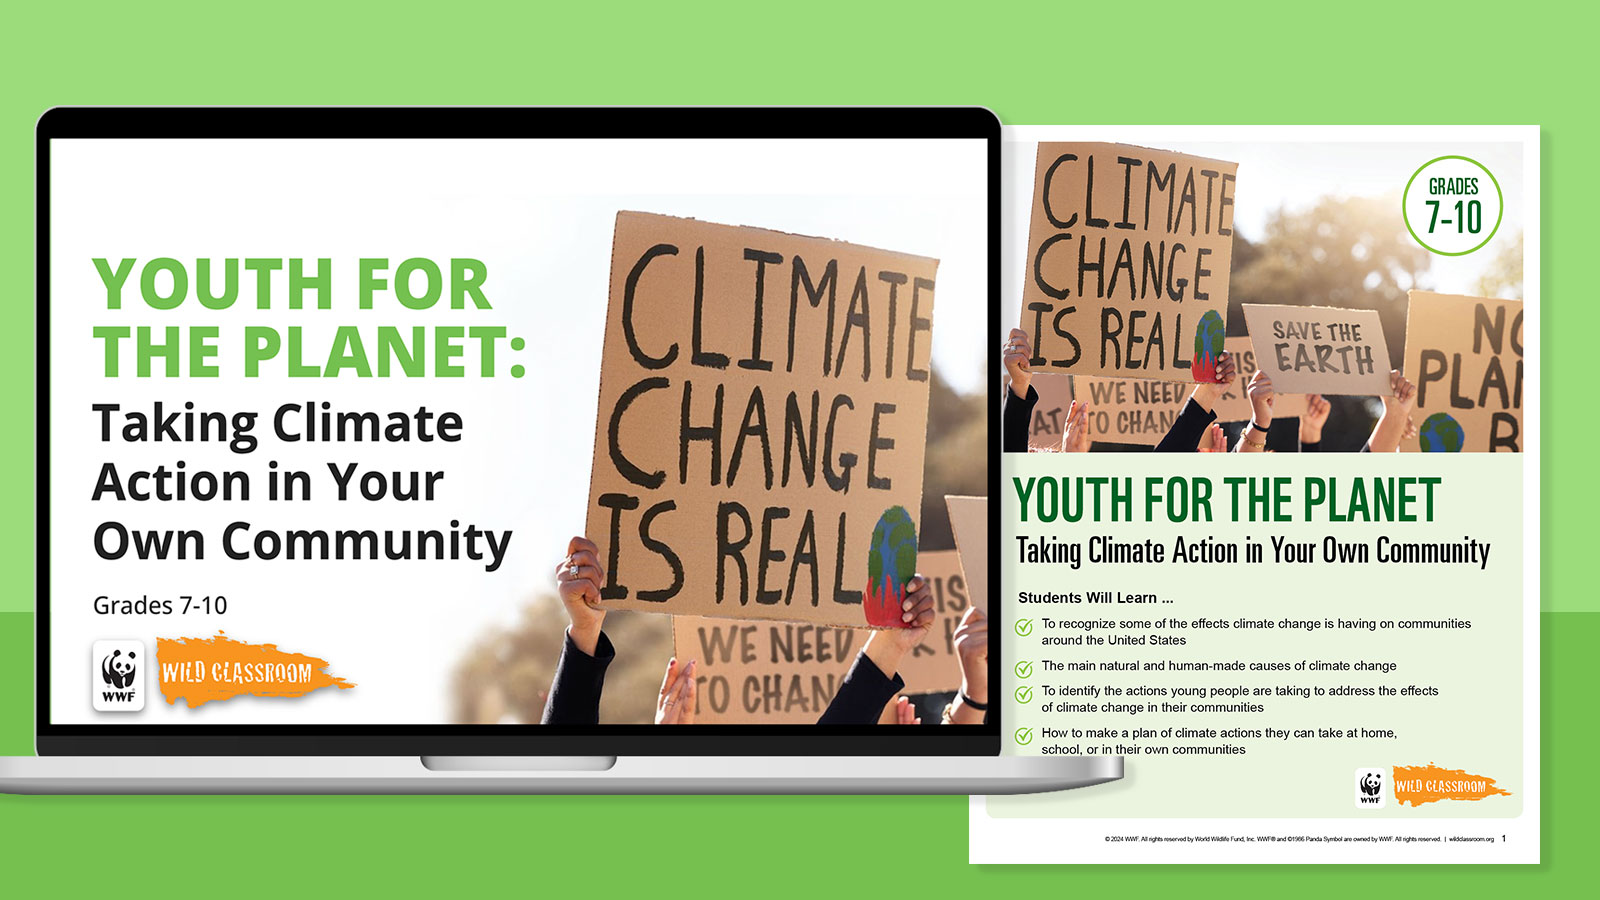 Feature image for the Youth For the Planet: Taking Climate Action in Your Own Community lesson plan and activities